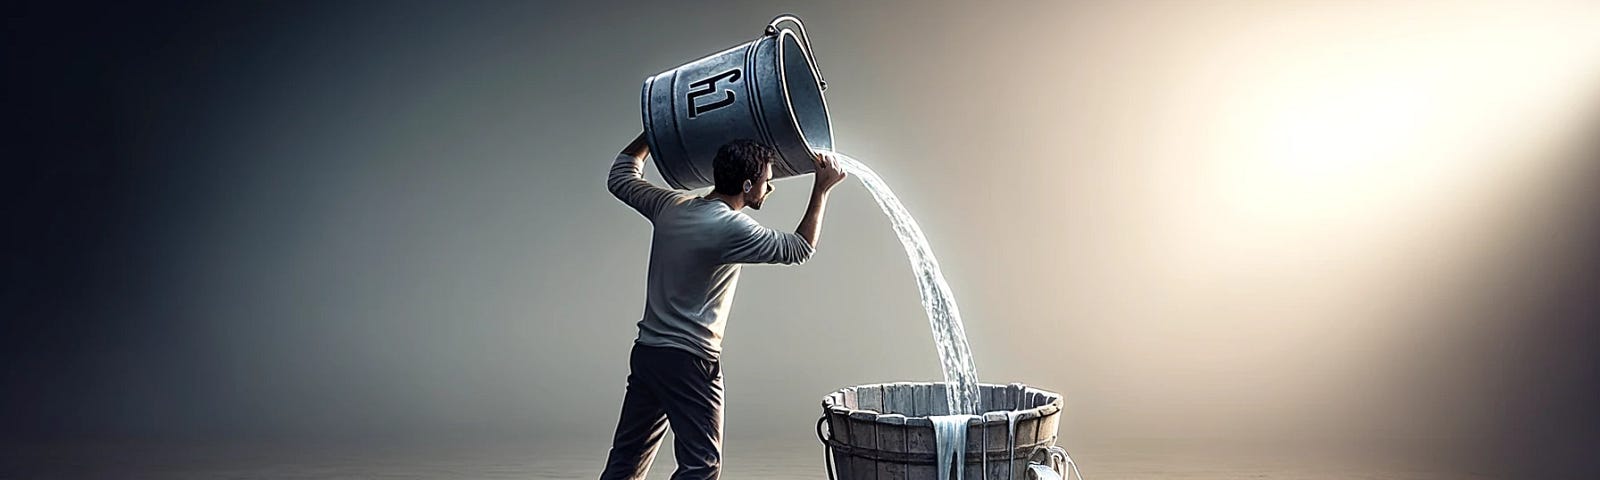 ChatGPT & DALL-E generated panoramic image of a person pouring water into a leaking bucket labeled “H2,” illustrating the concept of futile effort and loss.